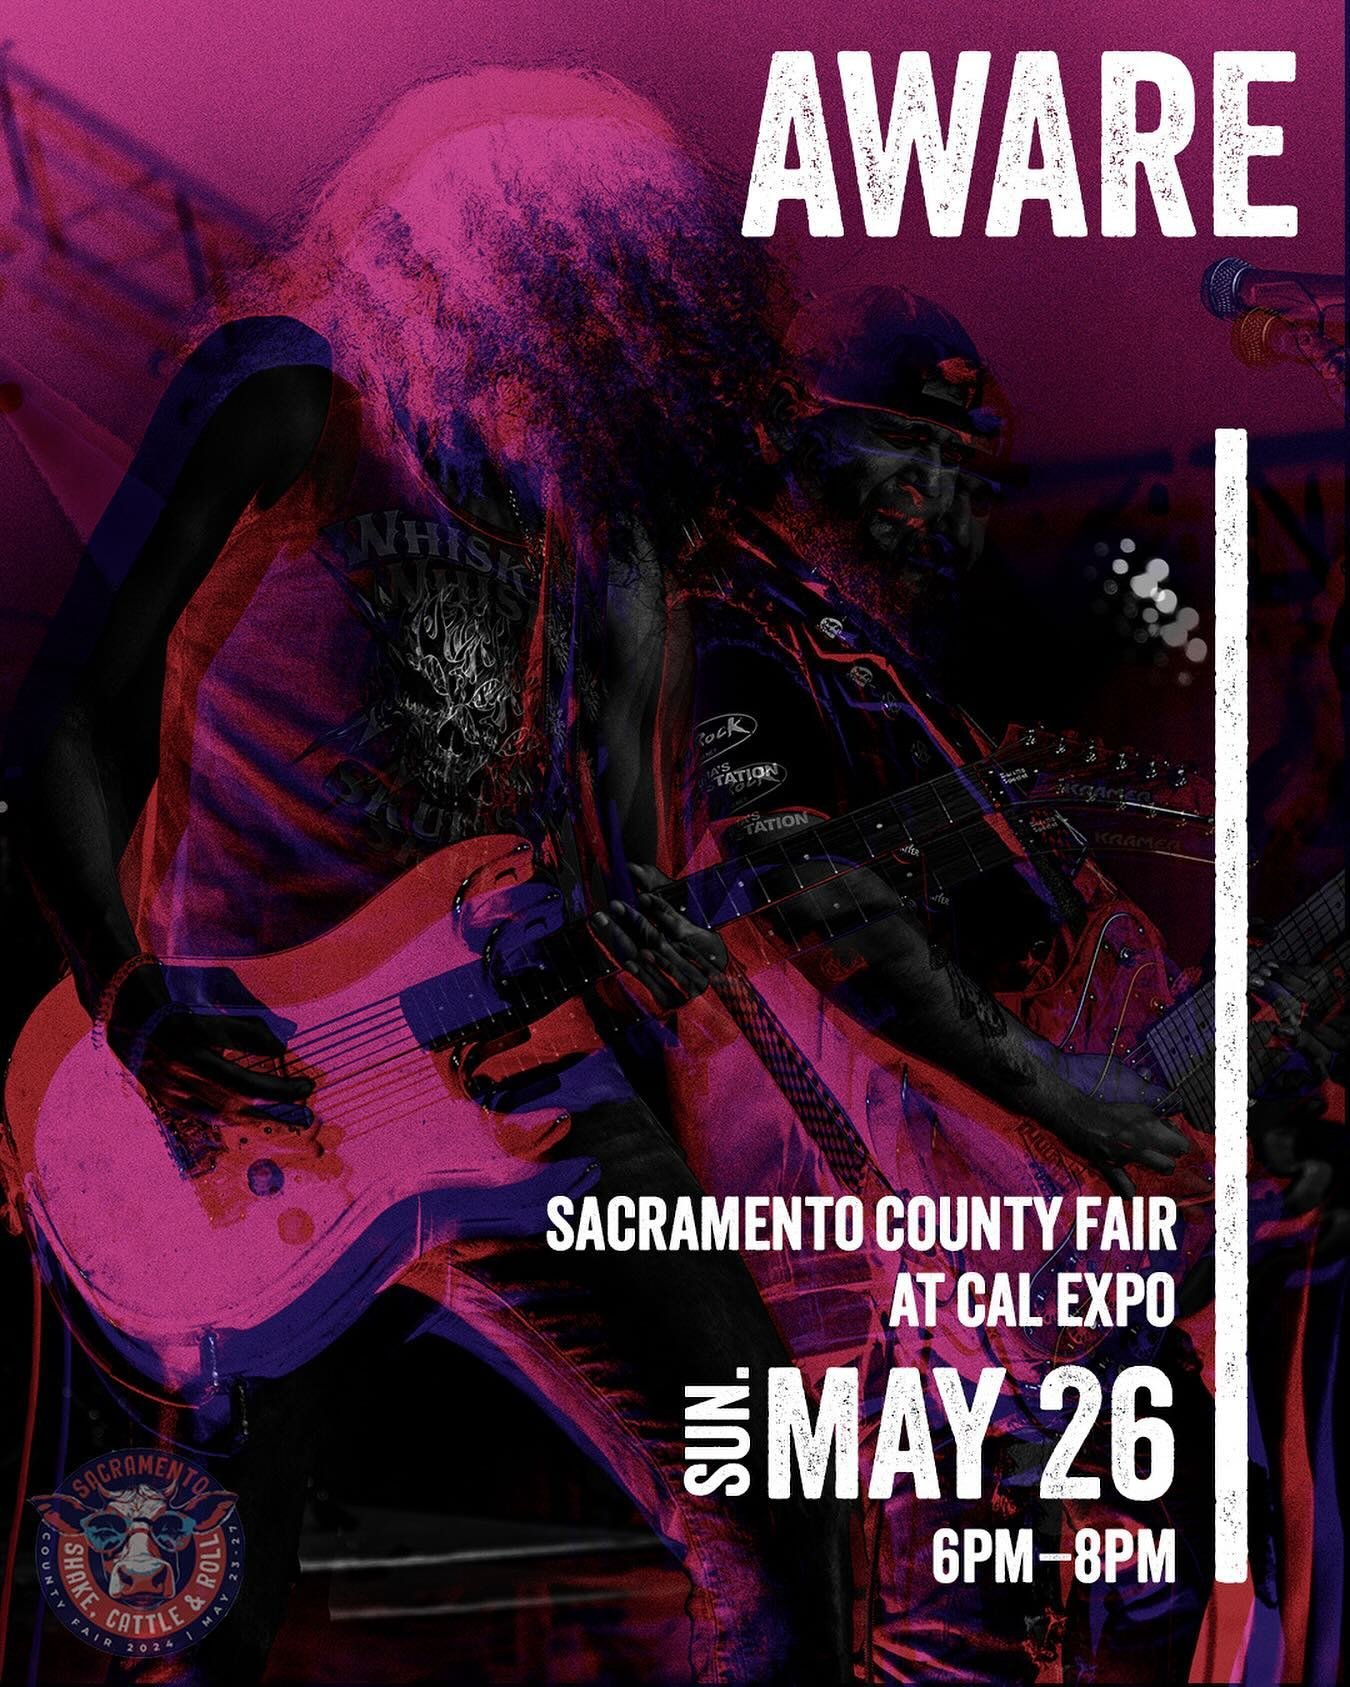 SACRAMENTO‼️ 

We have the honor of playing at the County Fair on Sunday, May 26th at Cal Expo. We will be rocking the community stage from 6pm-8pm. Start your summer off with a bang💥 @sacfair 

Poster made by @seeing.lavender 

#alternative #hardro